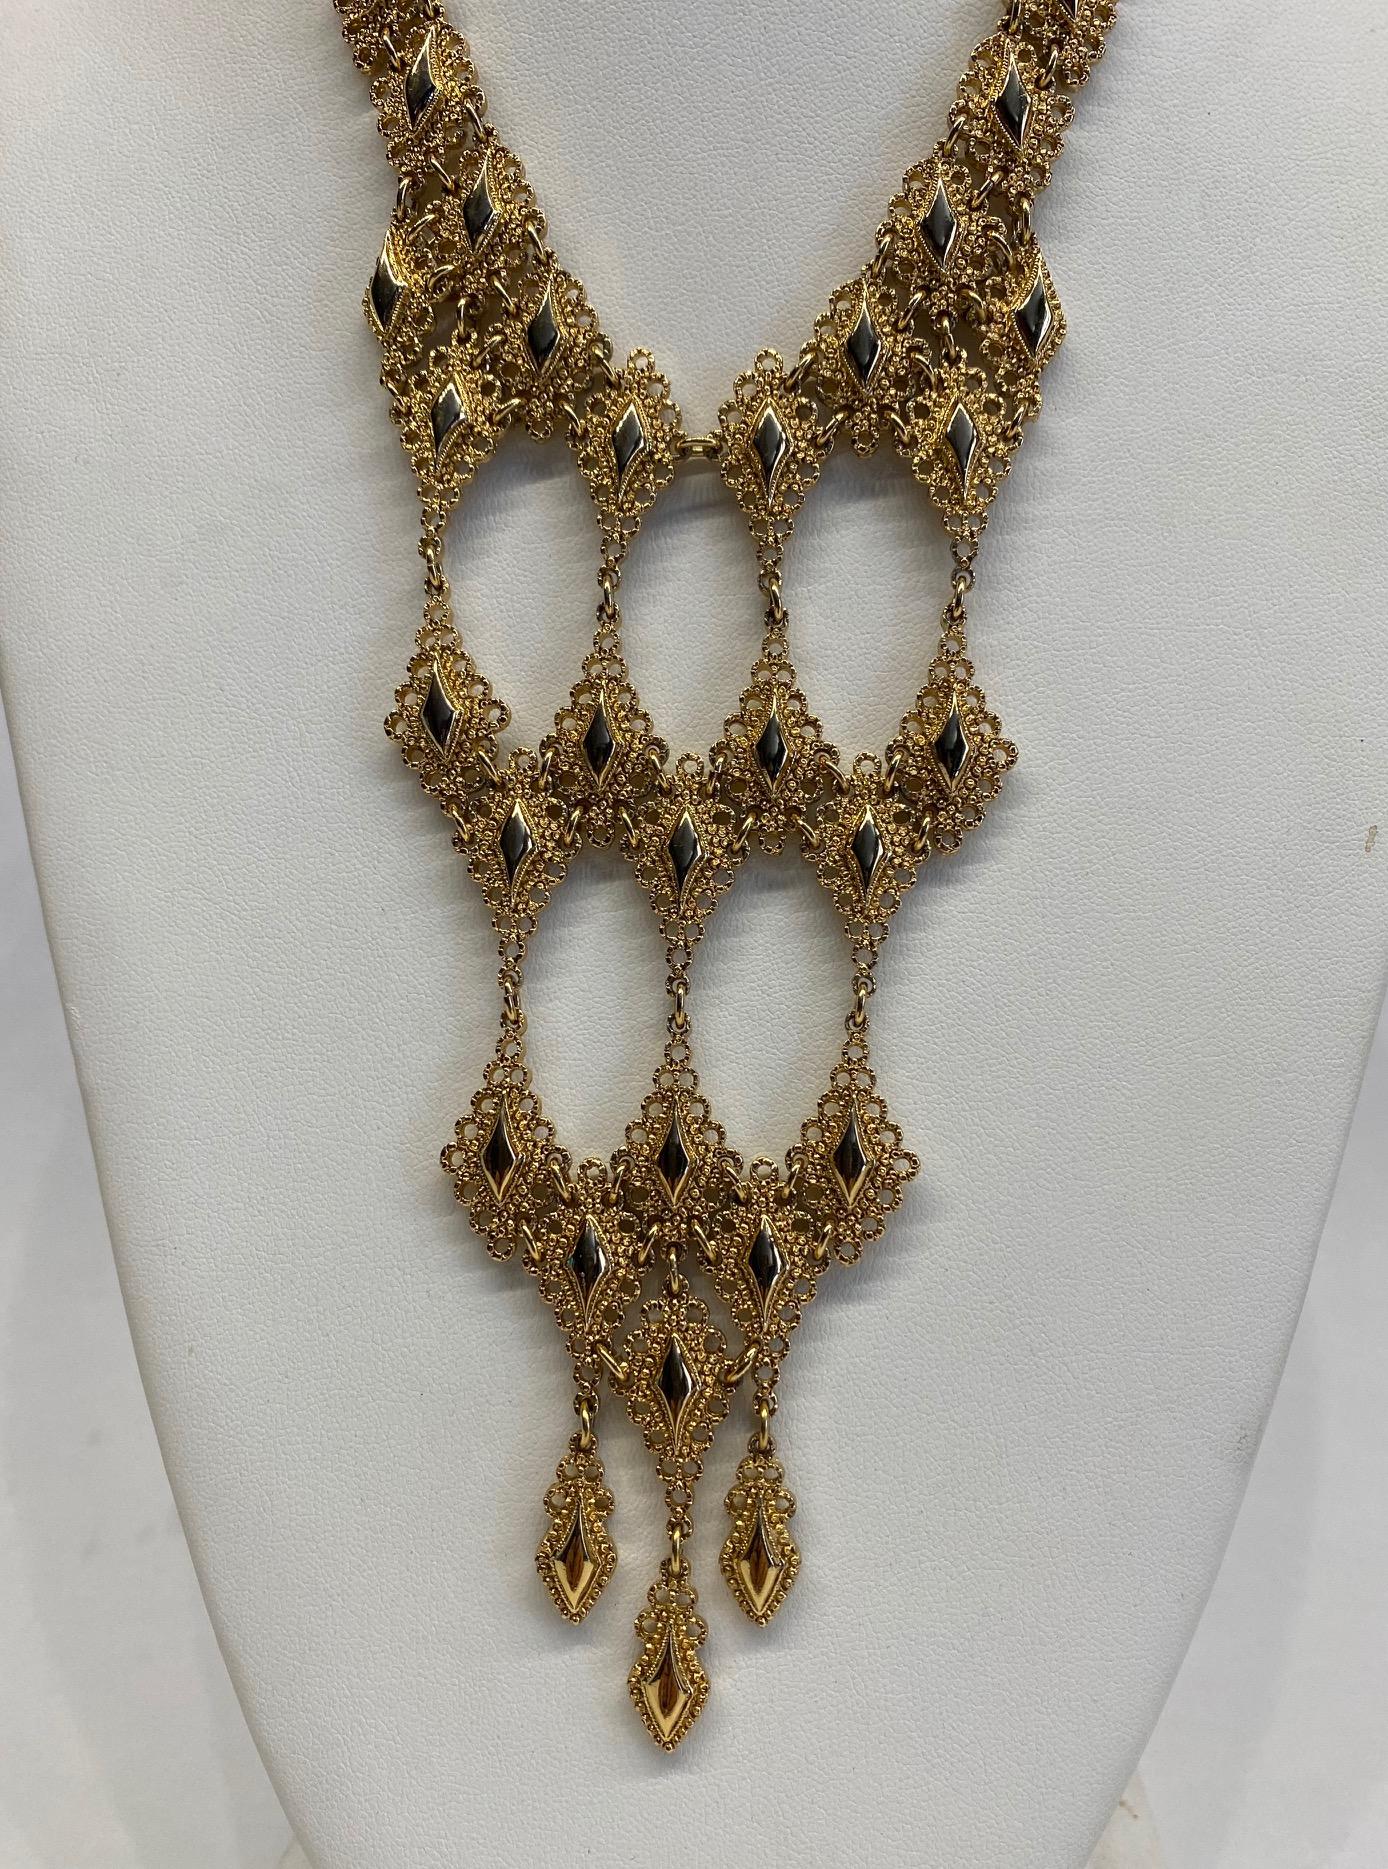 A lovely Monet statement necklace with matching earrings from the 1972 